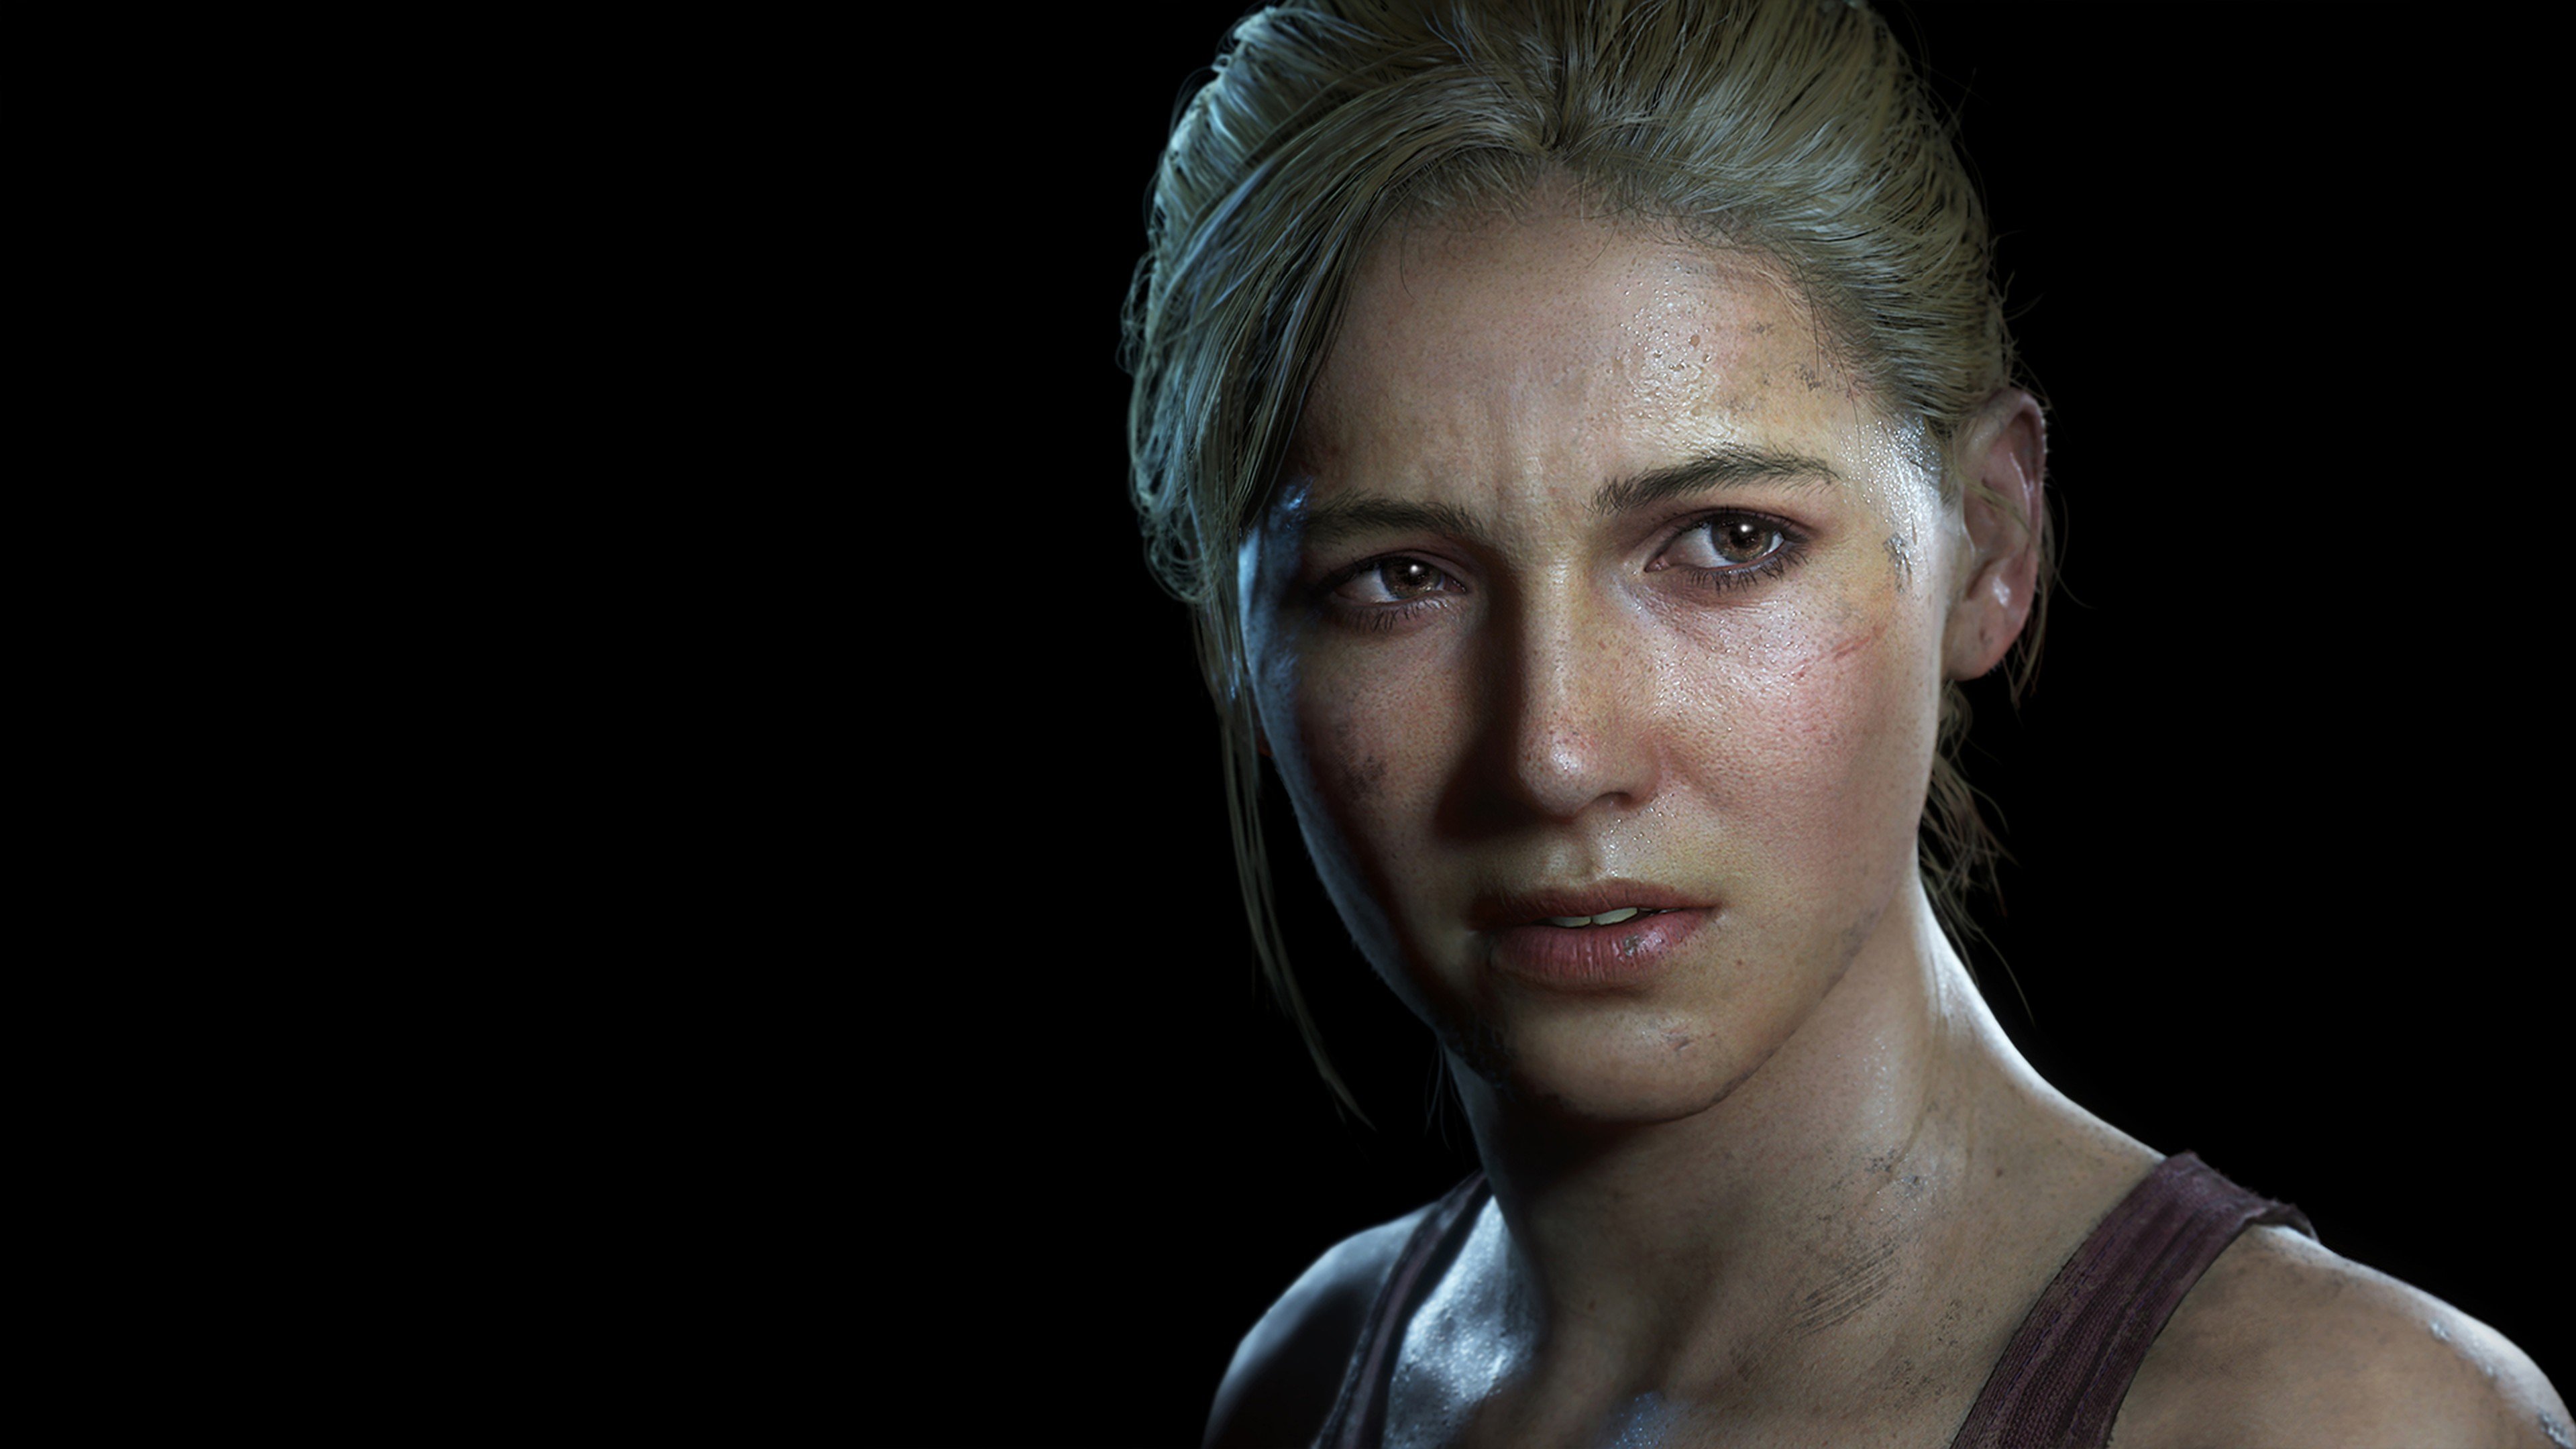 Elena, Uncharted 4: A Thief&039;s End, Elena fisher, Uncharted, Uncharted 3: Drake&039;s Deception Wallpaper